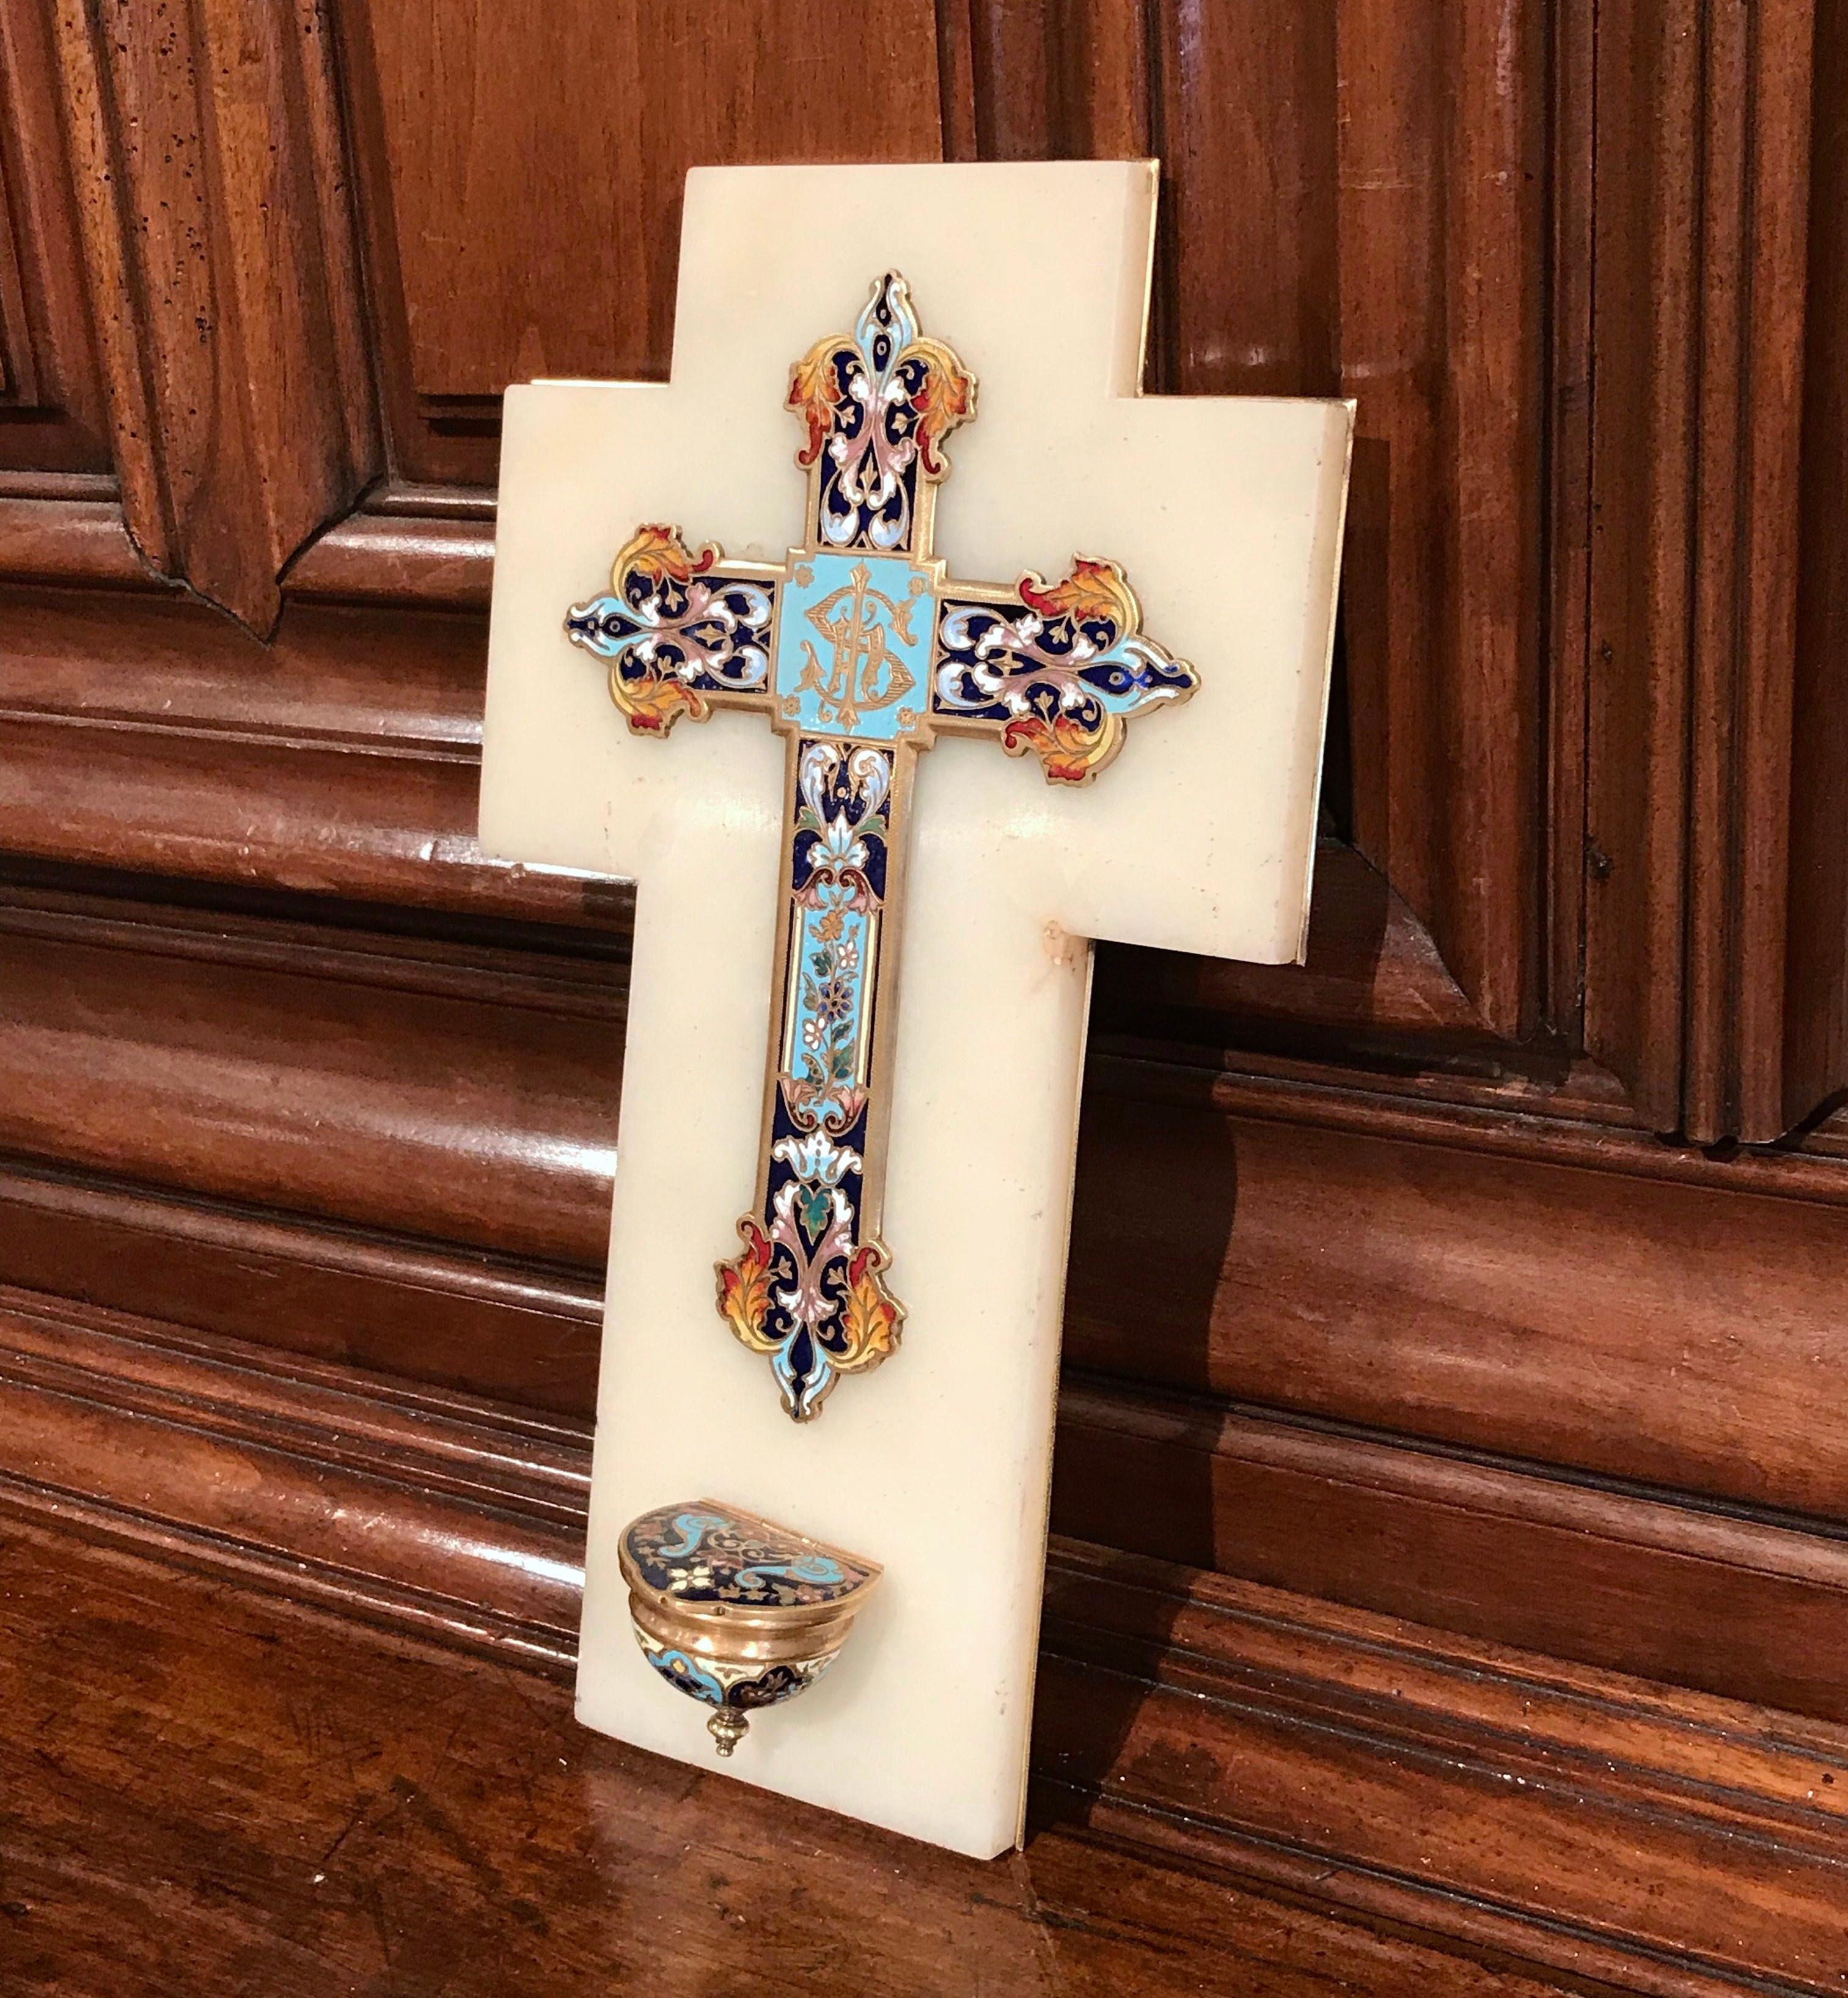 This large marble and bronze cross with holy water recipient was created in France, circa 1870. The antique piece features beautiful, intricate cloisonné work with enamel, stone and bronze and a gleaming green marble base. The religious object is in